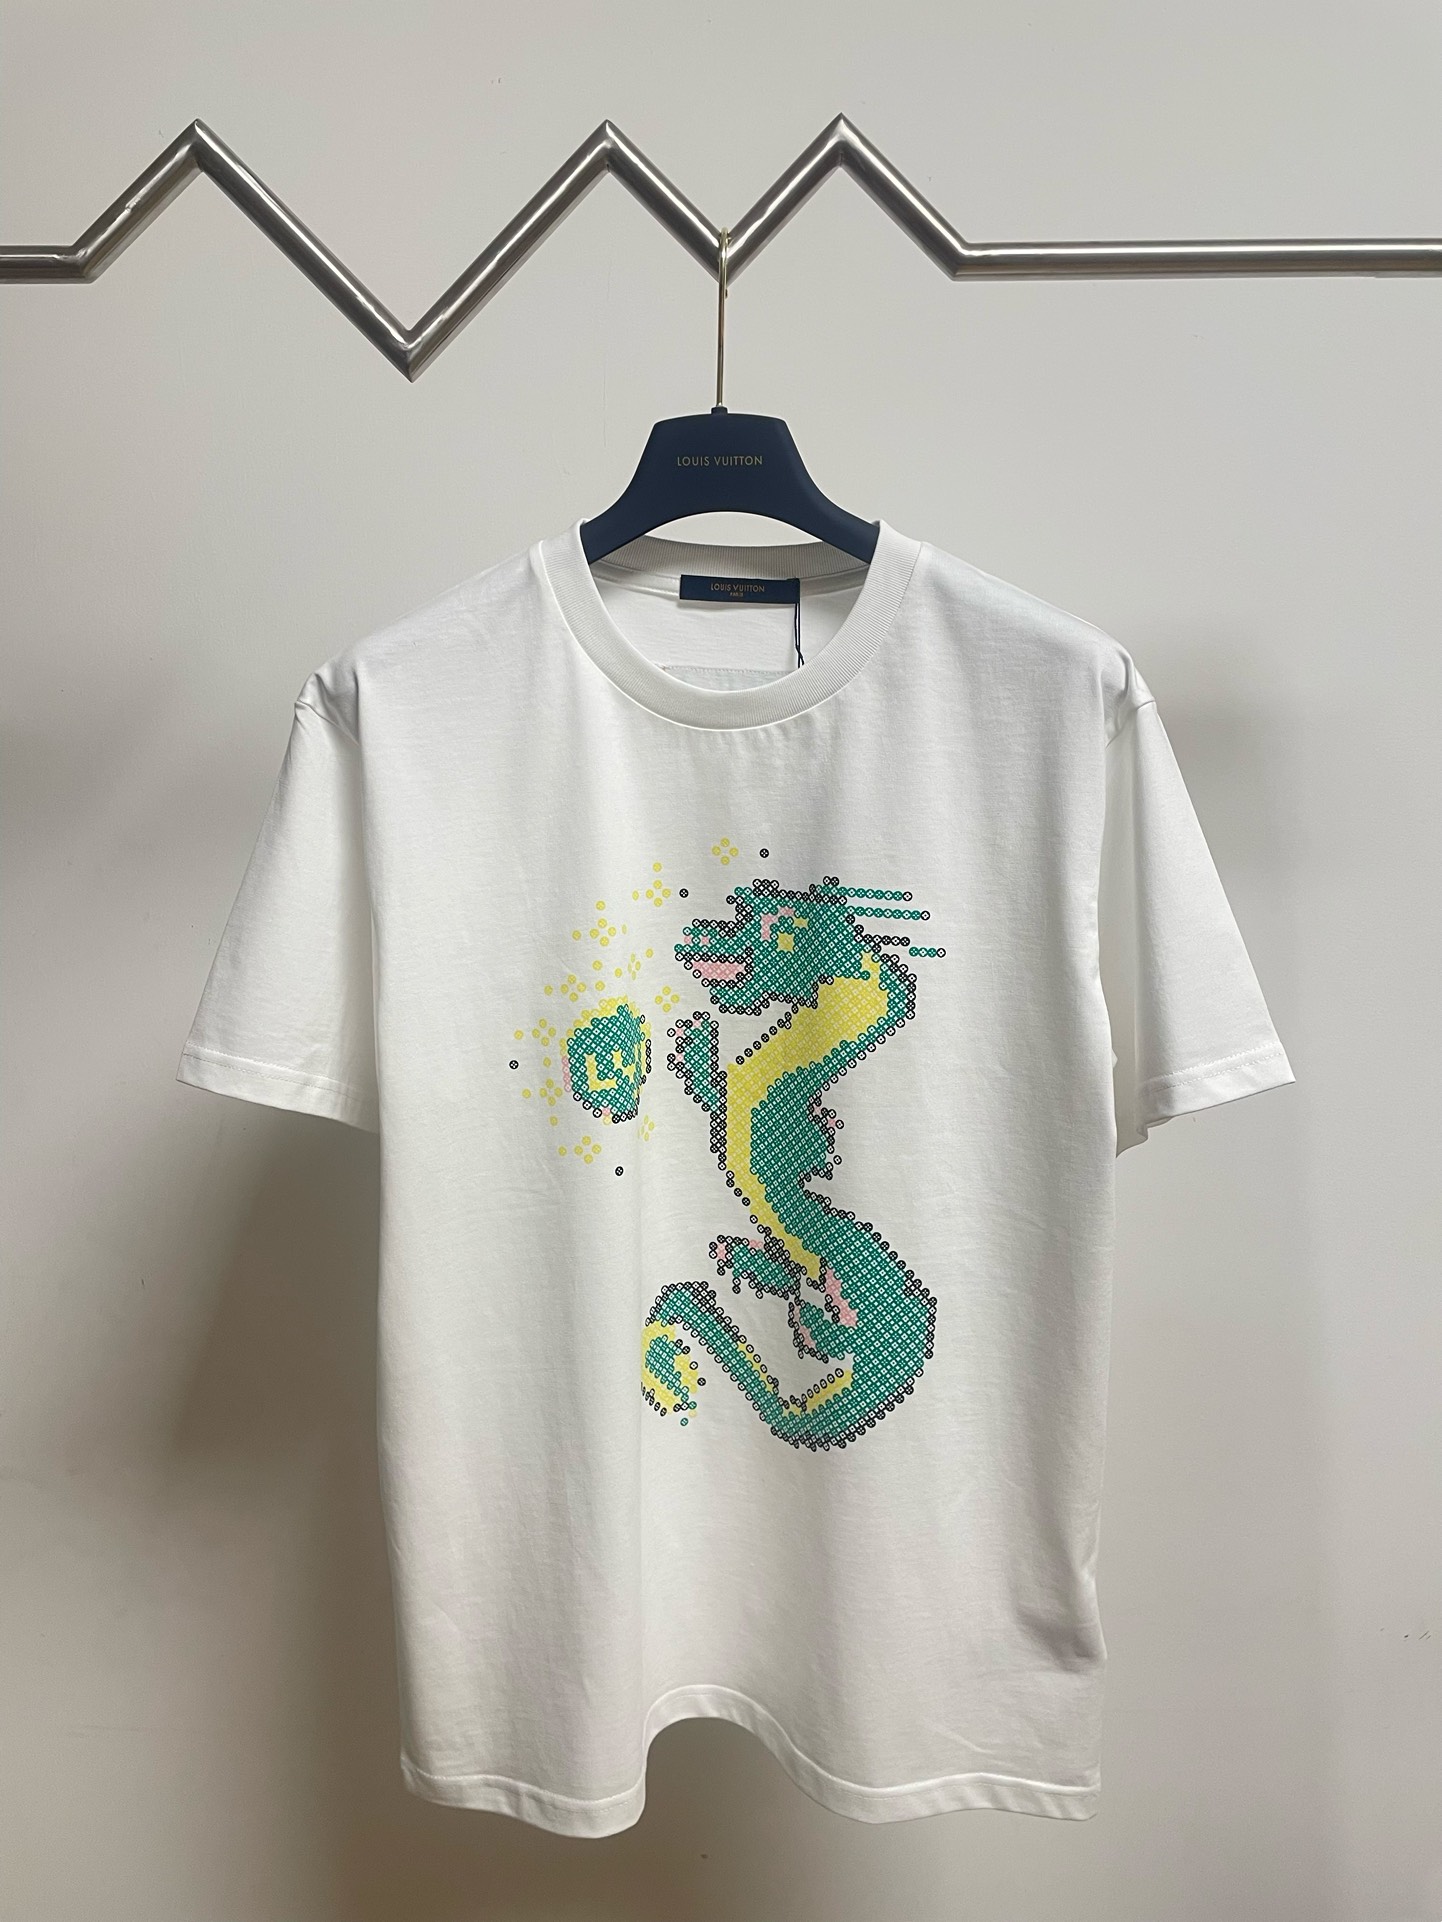 Louis Vuitton Wholesale
 Clothing T-Shirt White Printing Unisex Cotton Spring/Summer Collection Short Sleeve